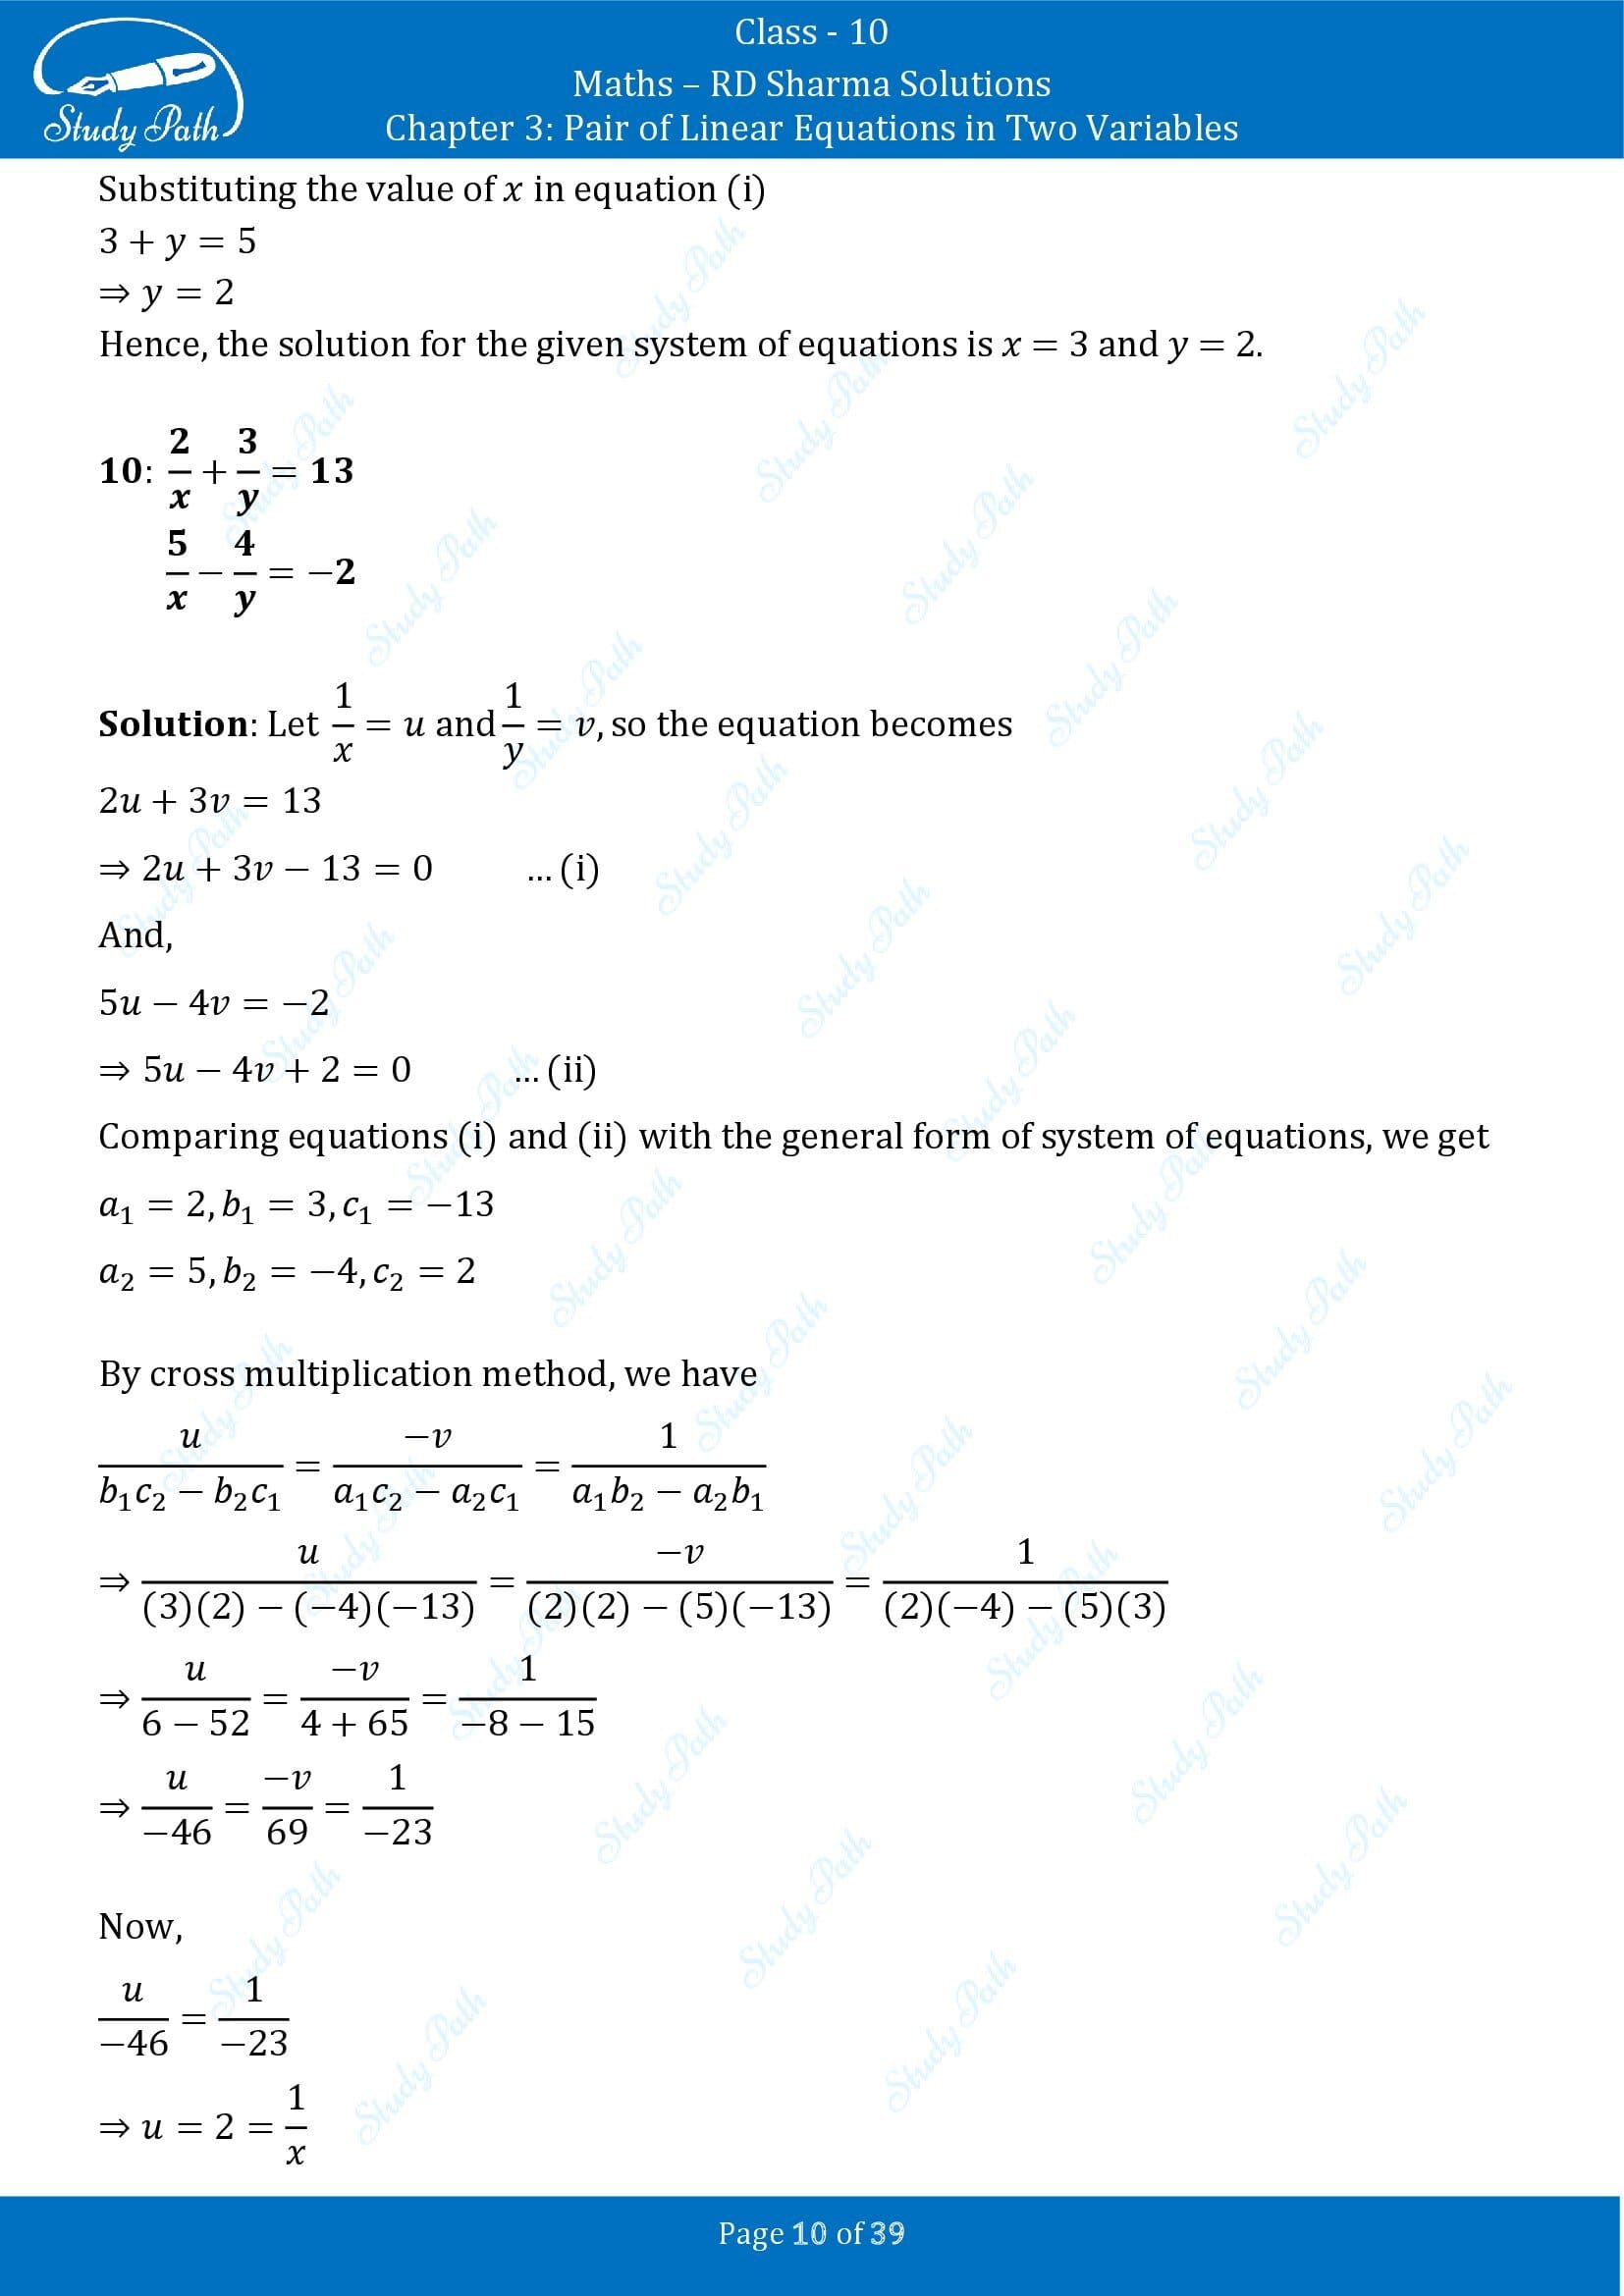 RD Sharma Solutions Class 10 Chapter 3 Pair of Linear Equations in Two Variables Exercise 3.4 00010